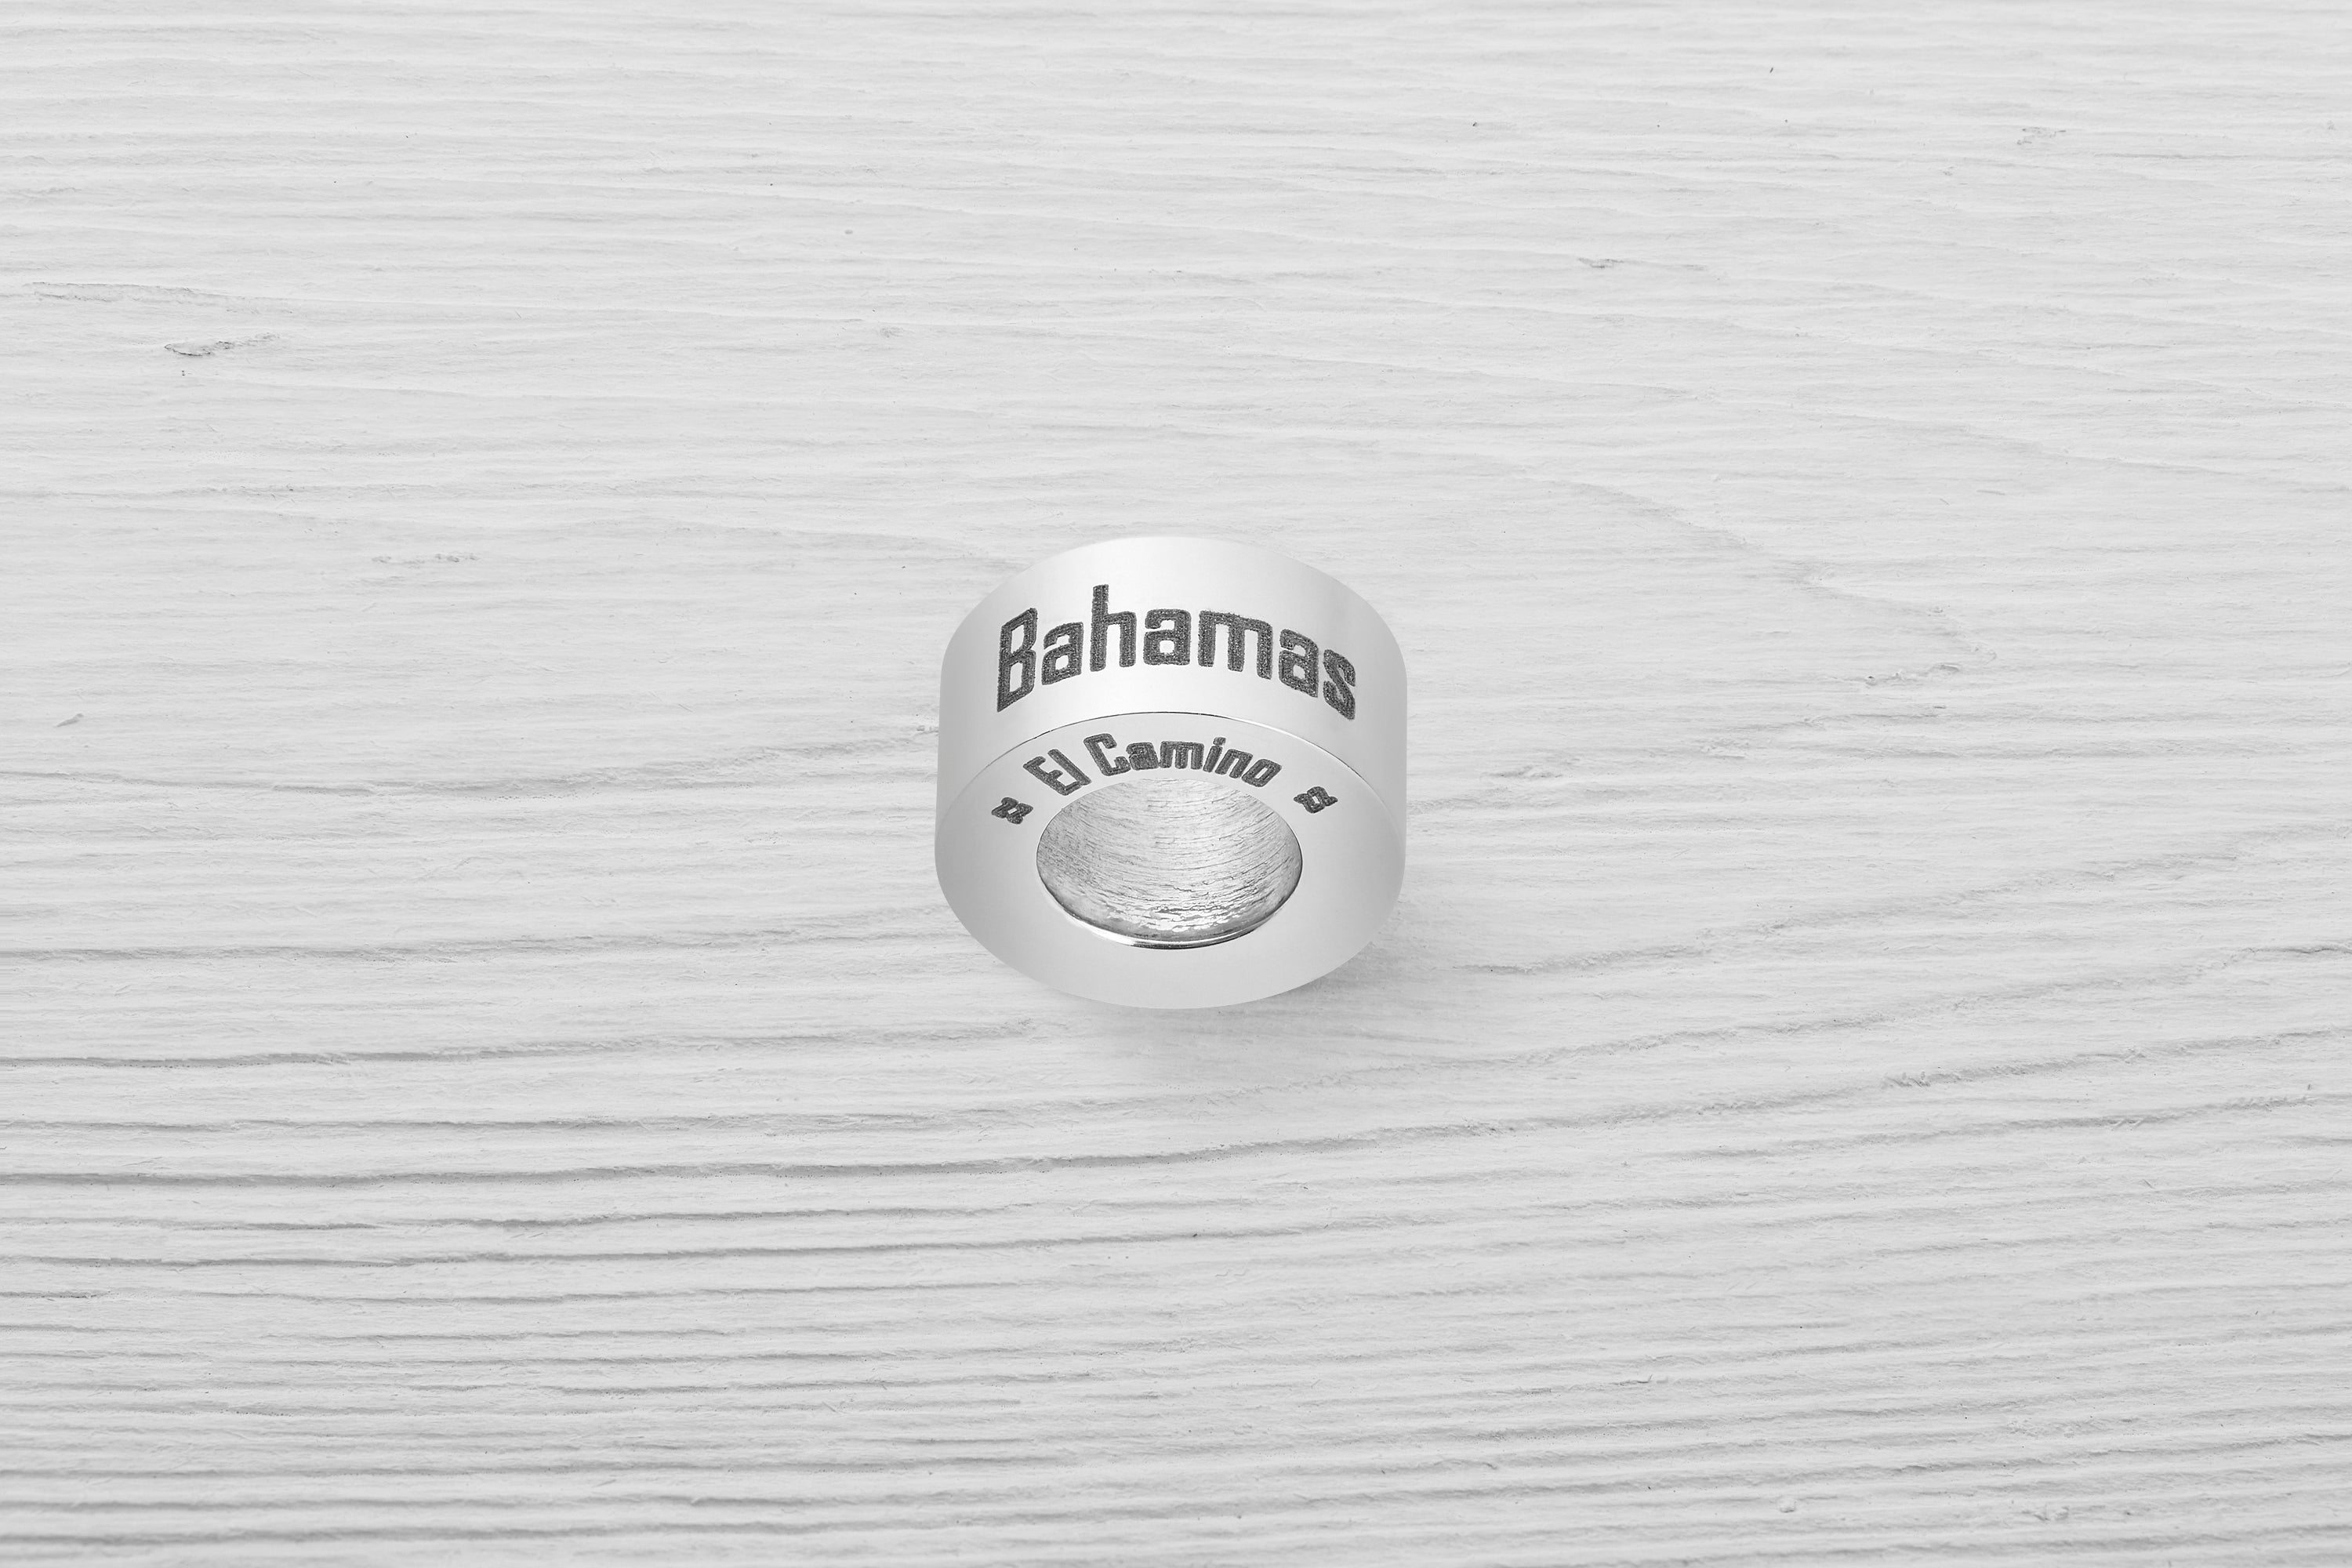 Bahamas Country Step El Camino Bracelets Official Store